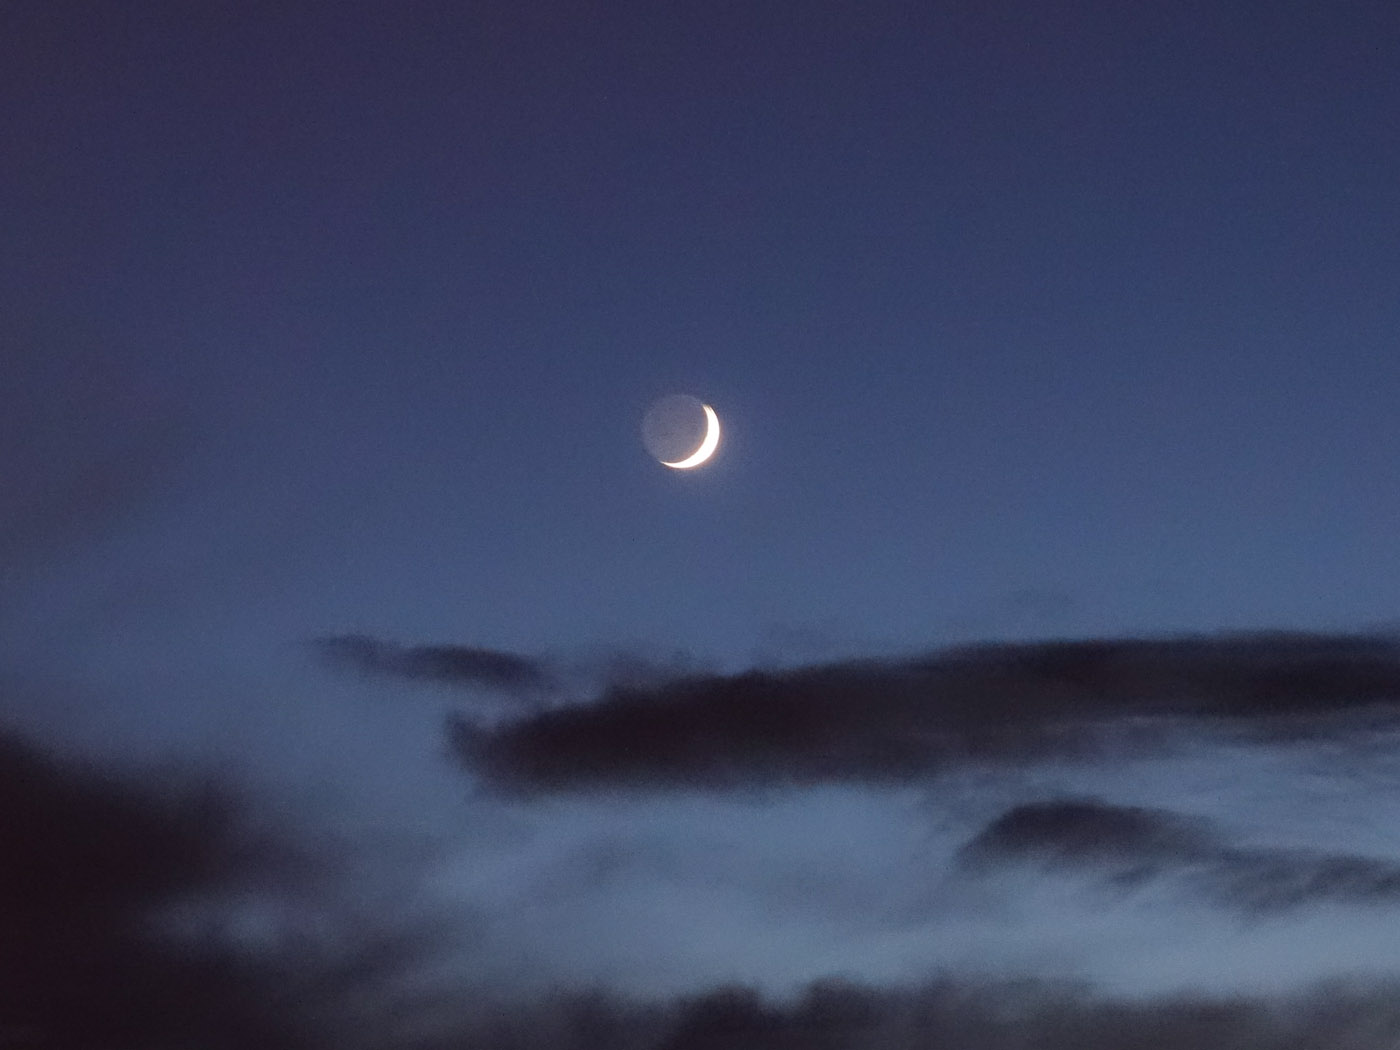 Reykjavík. Miscellaneous LXXII. - The moon - the 'unvisible' part was visible, too. (1 till 10 January 2014)